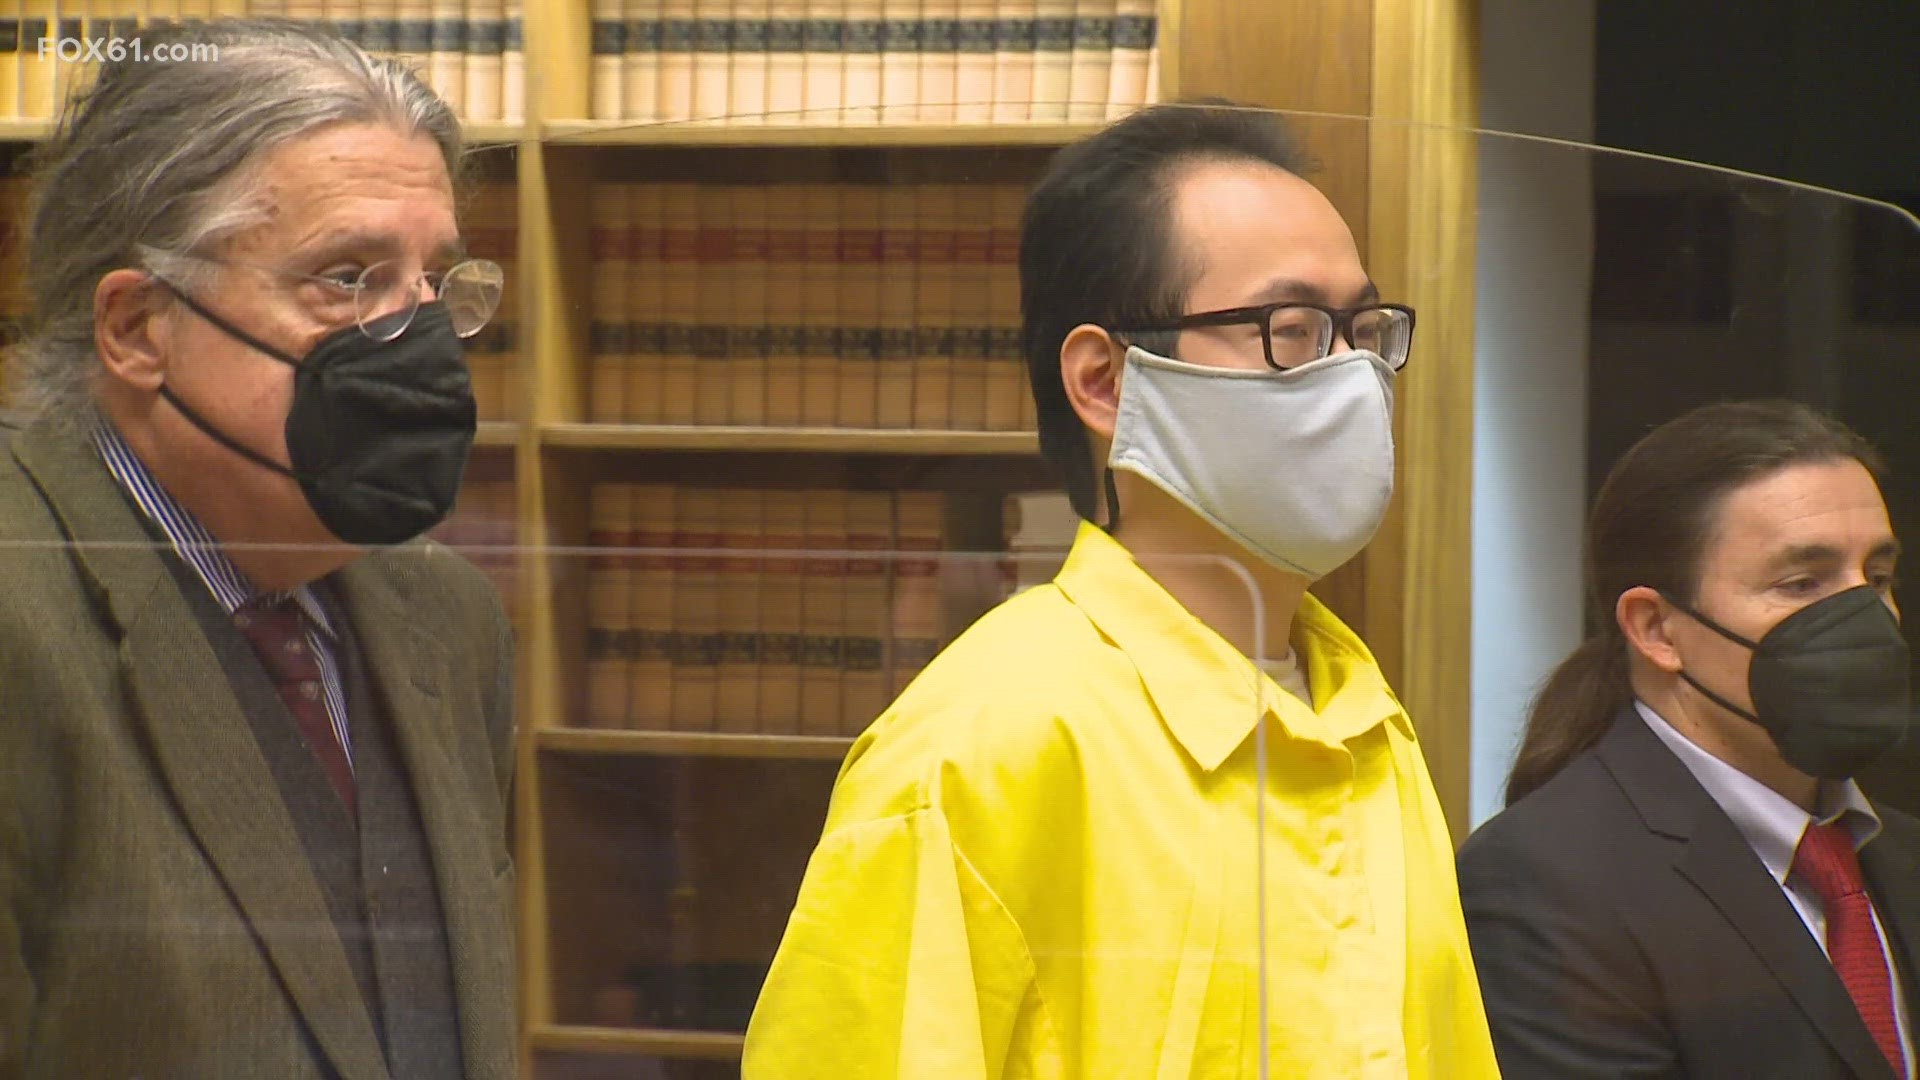 Qinxuan Pan apologized for his actions Tuesday during a hearing in a New Haven courtroom packed with family and friends of the victim, Kevin Jiang.